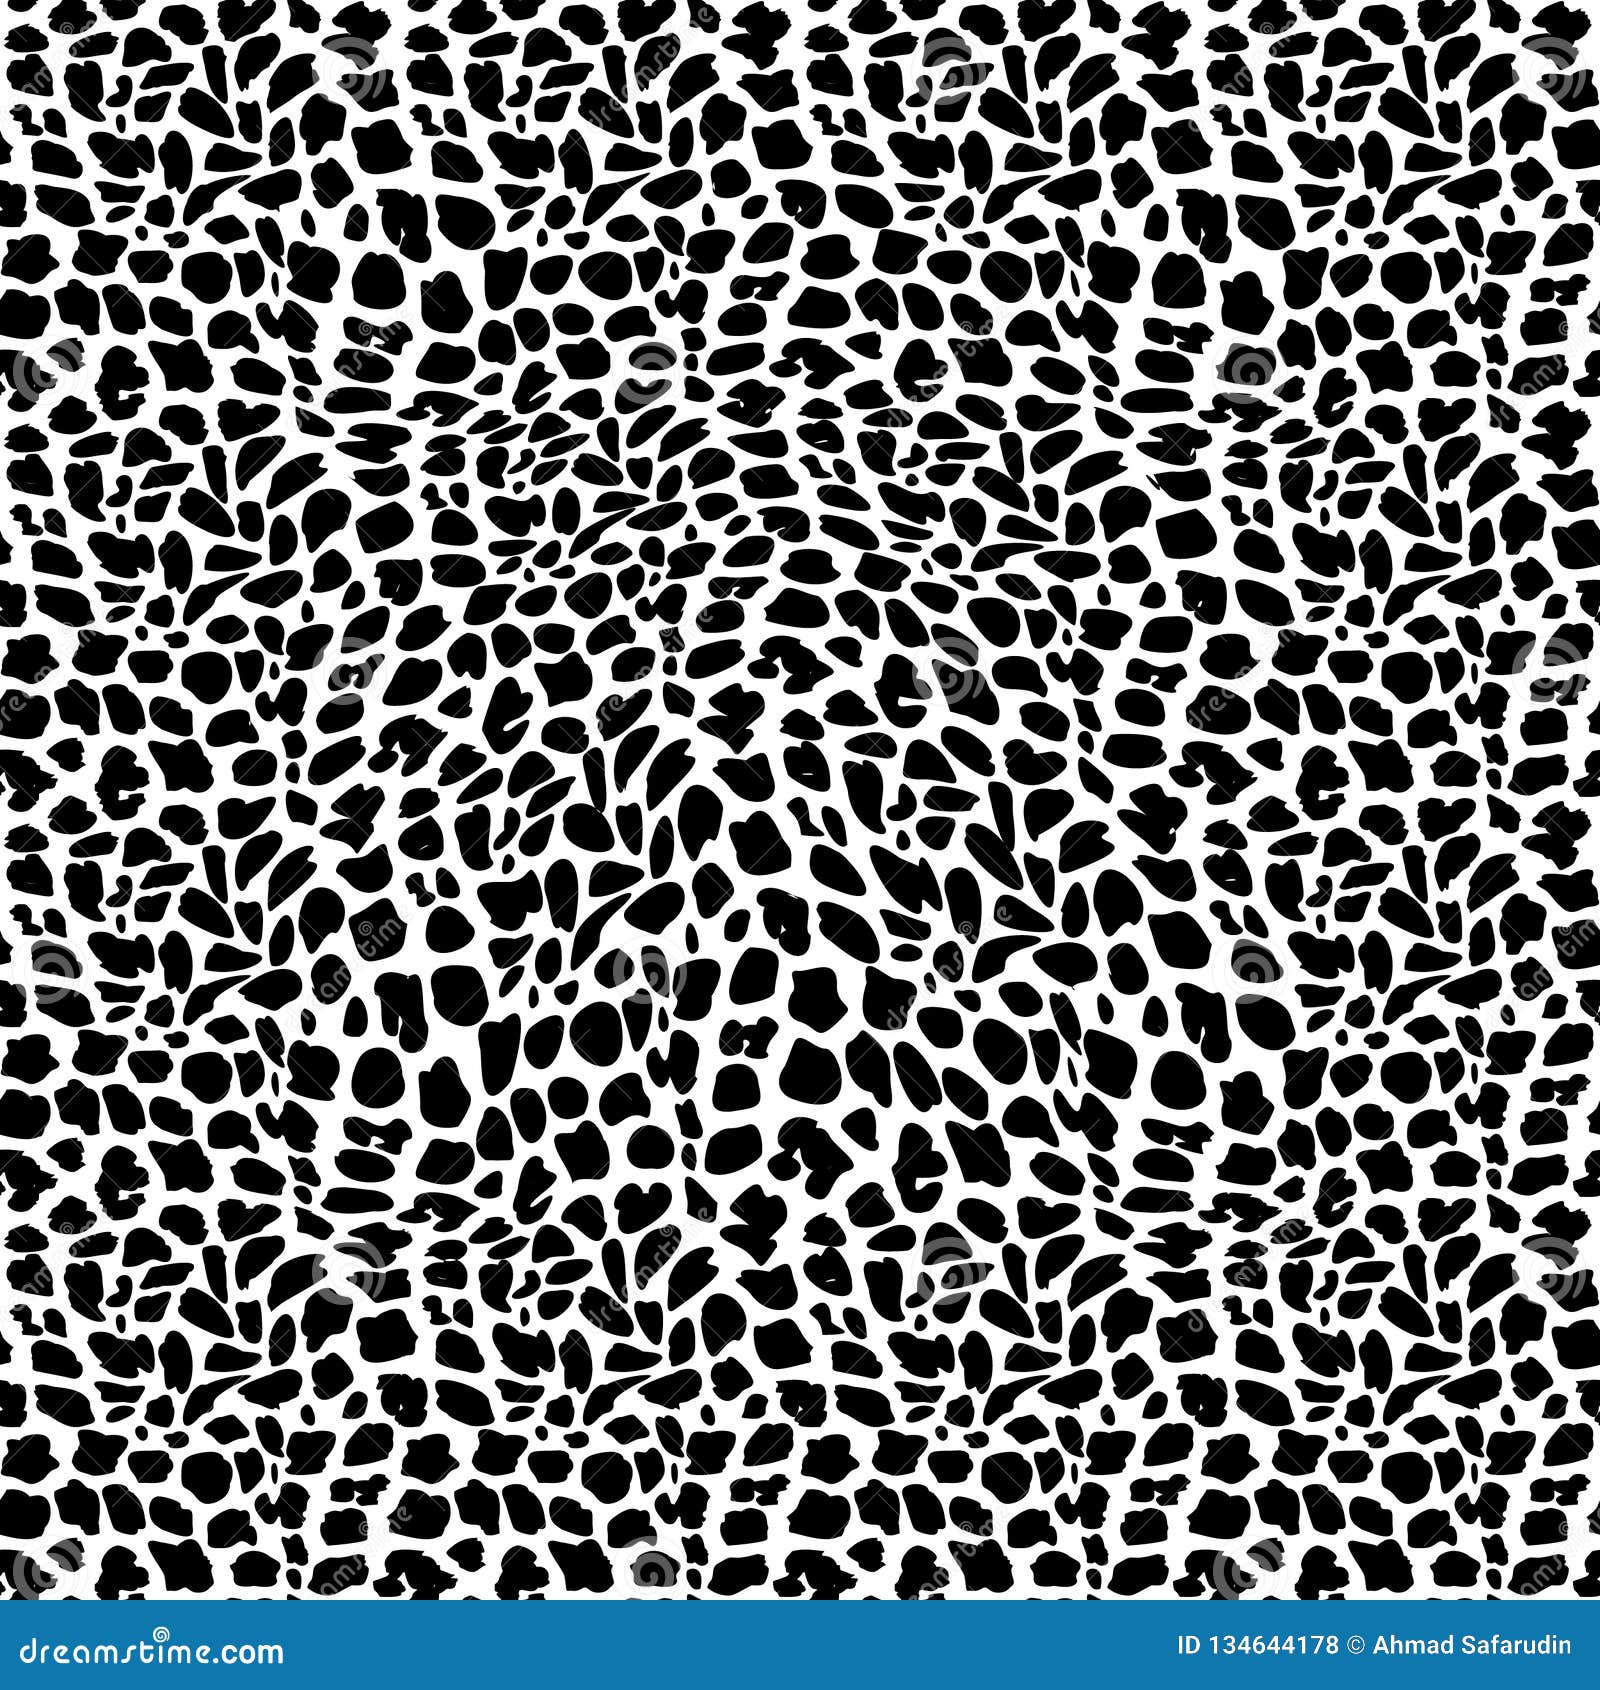 Seamless black and white color leopard print Vector Image